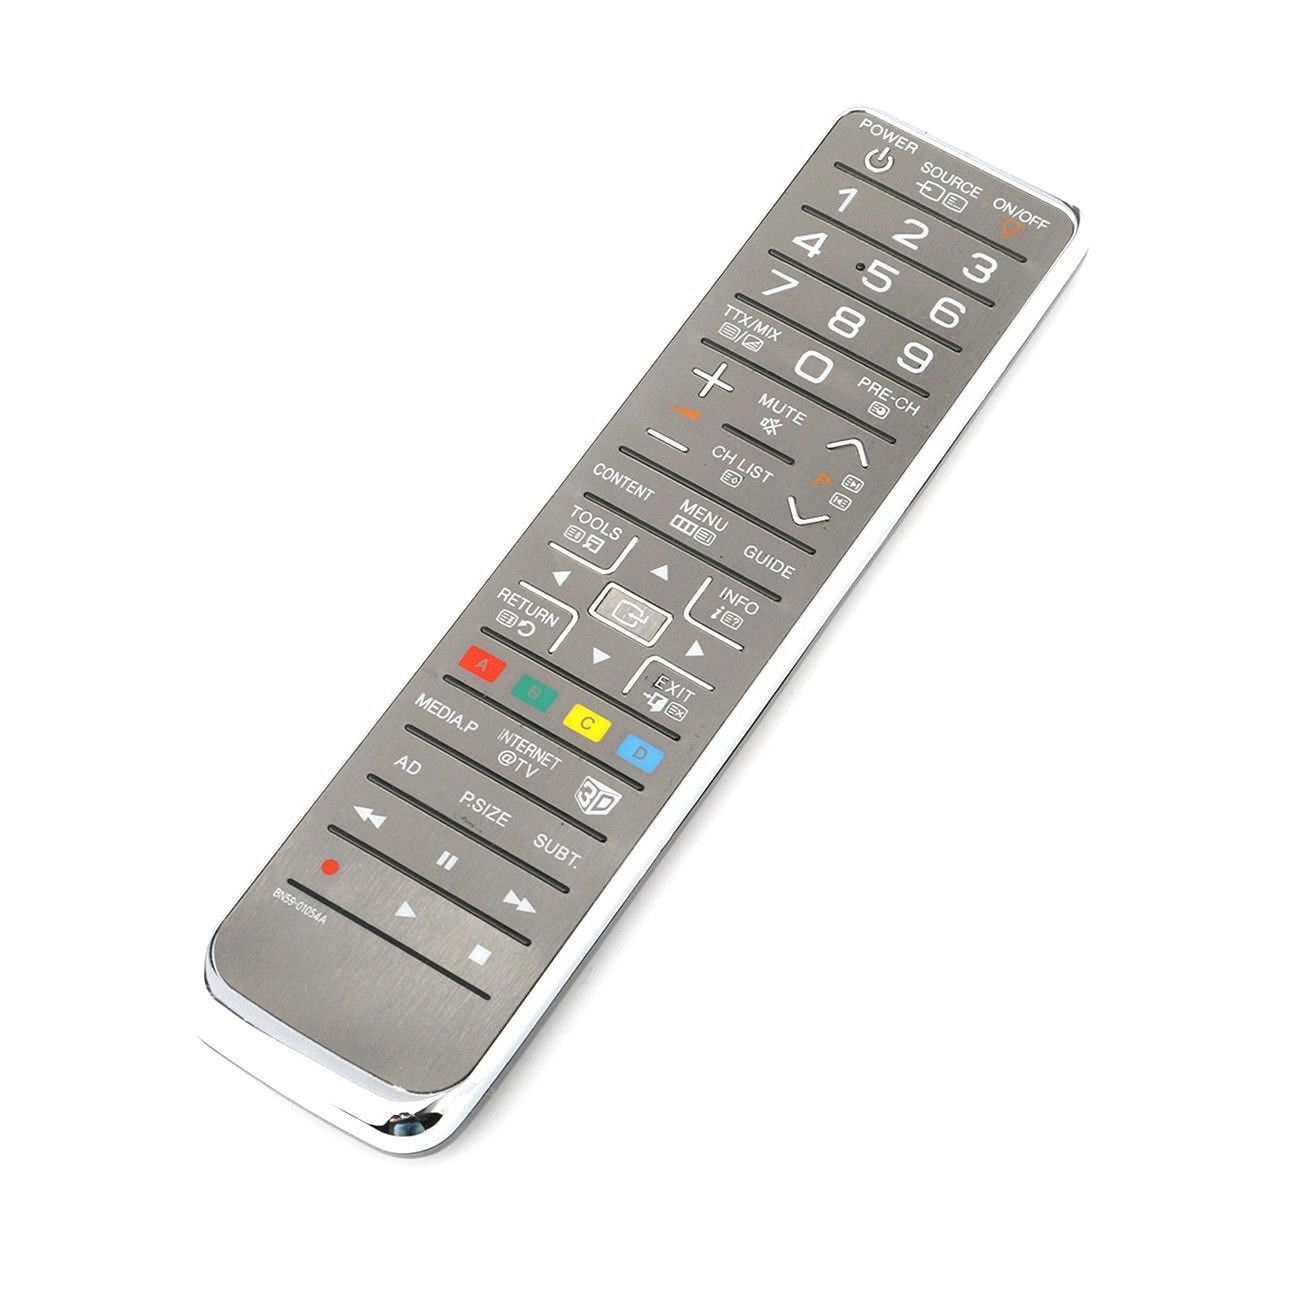 Bn59-01054a Replacement Remote Control Sub Bn59-01051a for All Samsung Smart Tv's (Metal)